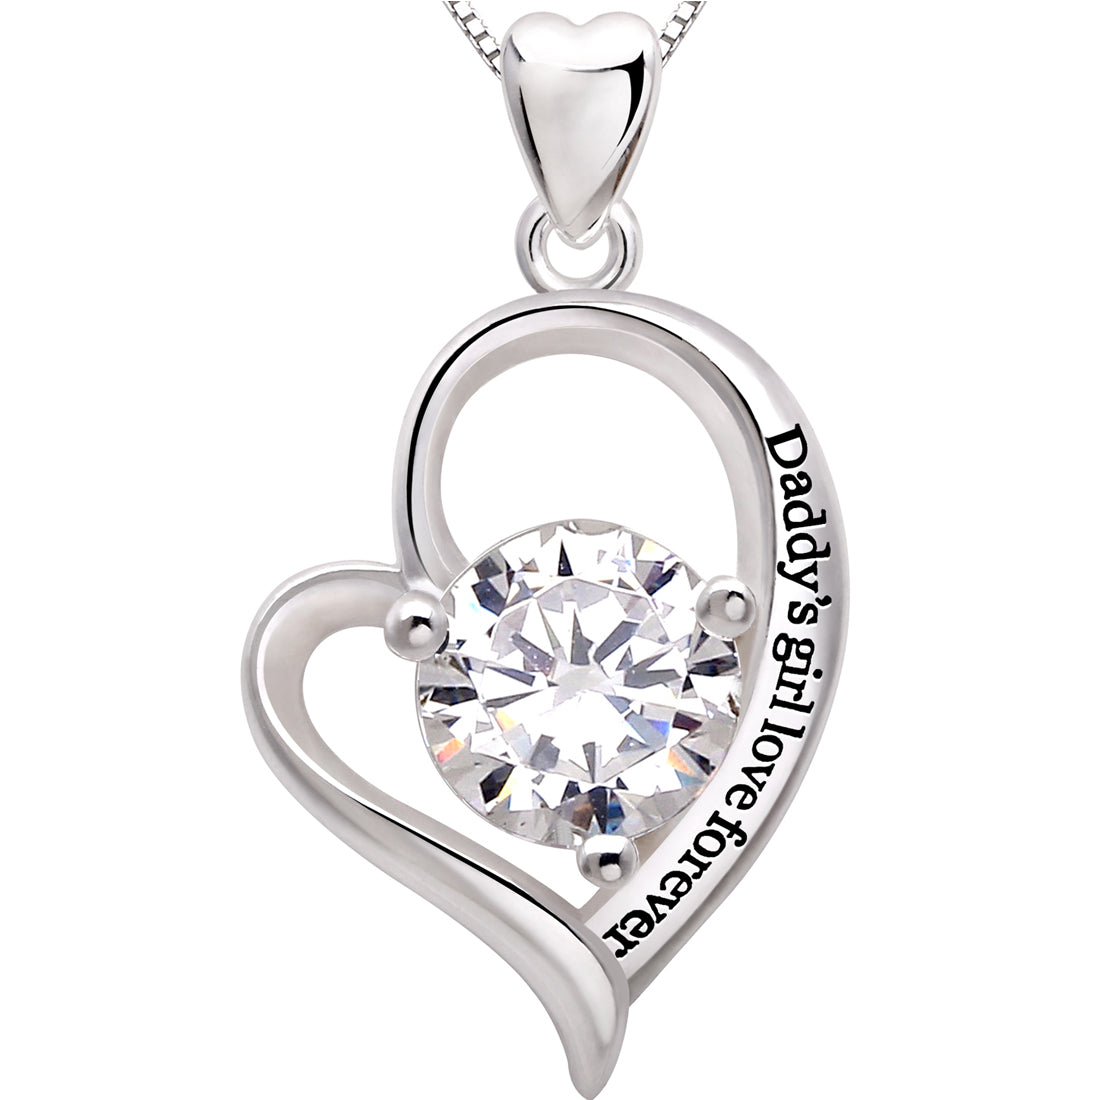 ALOV Jewelry Sterling Silver "Daddy's girl love forever" Love Heart Cubic Zirconia Pendant Necklace